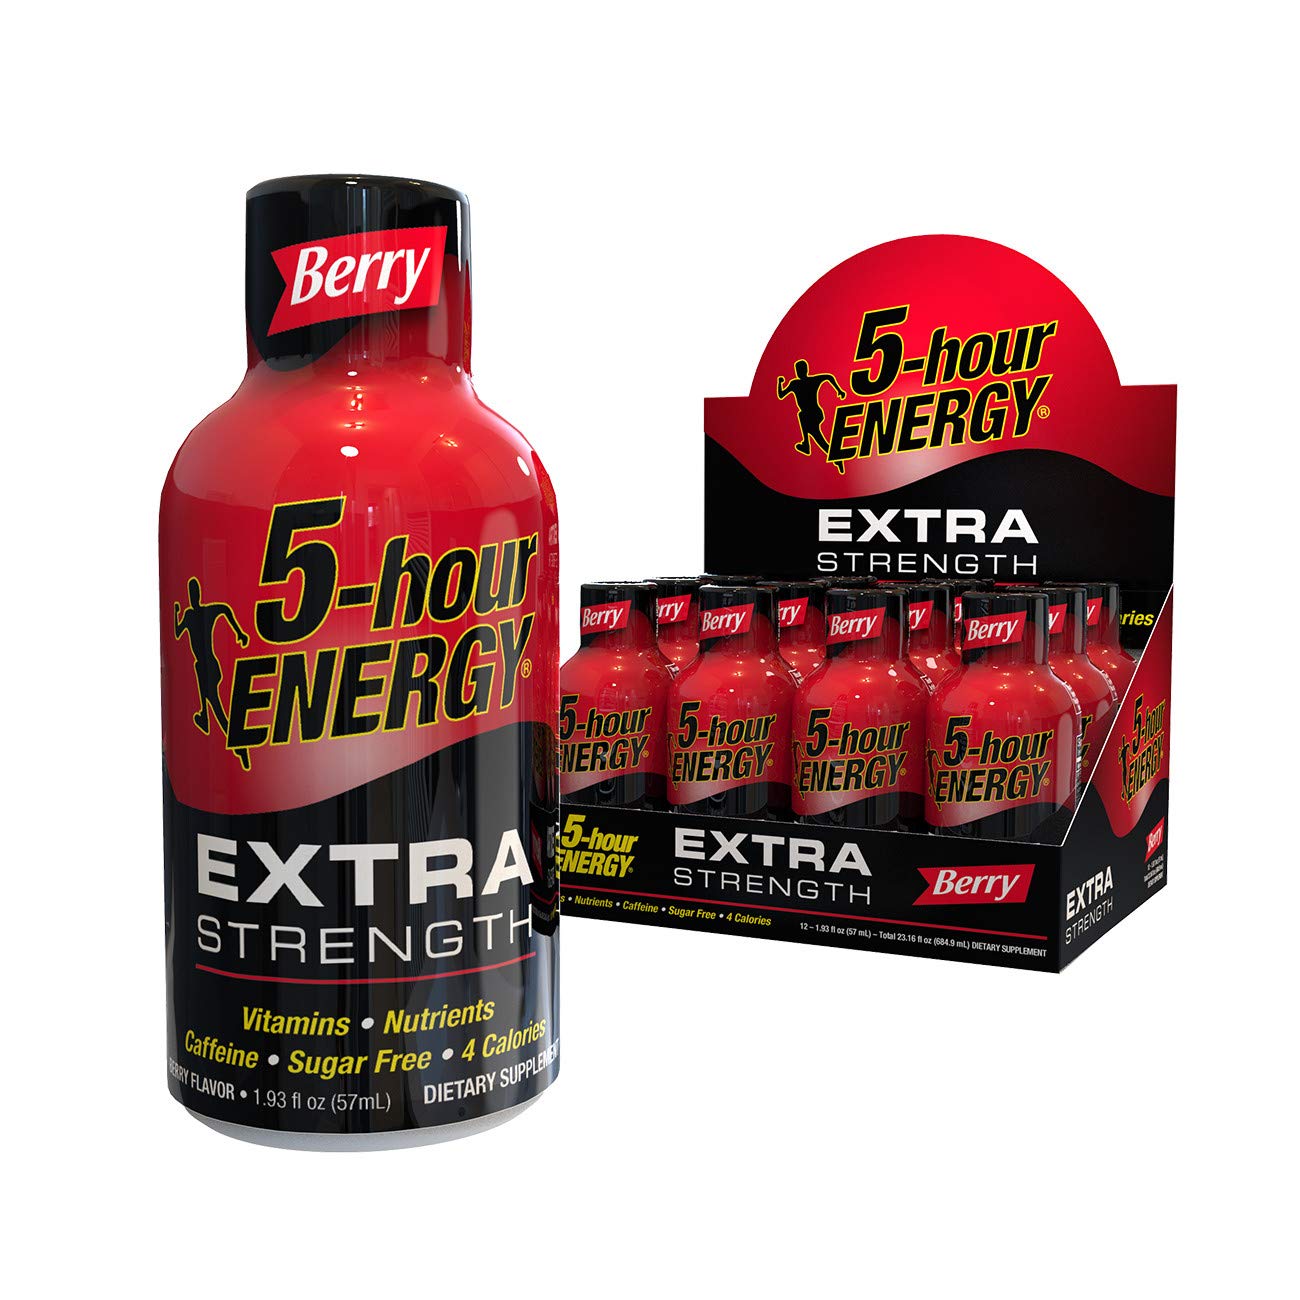 5 Hour Energy EXTRA STRENGTH Berry Discount Pack 48 Bottles